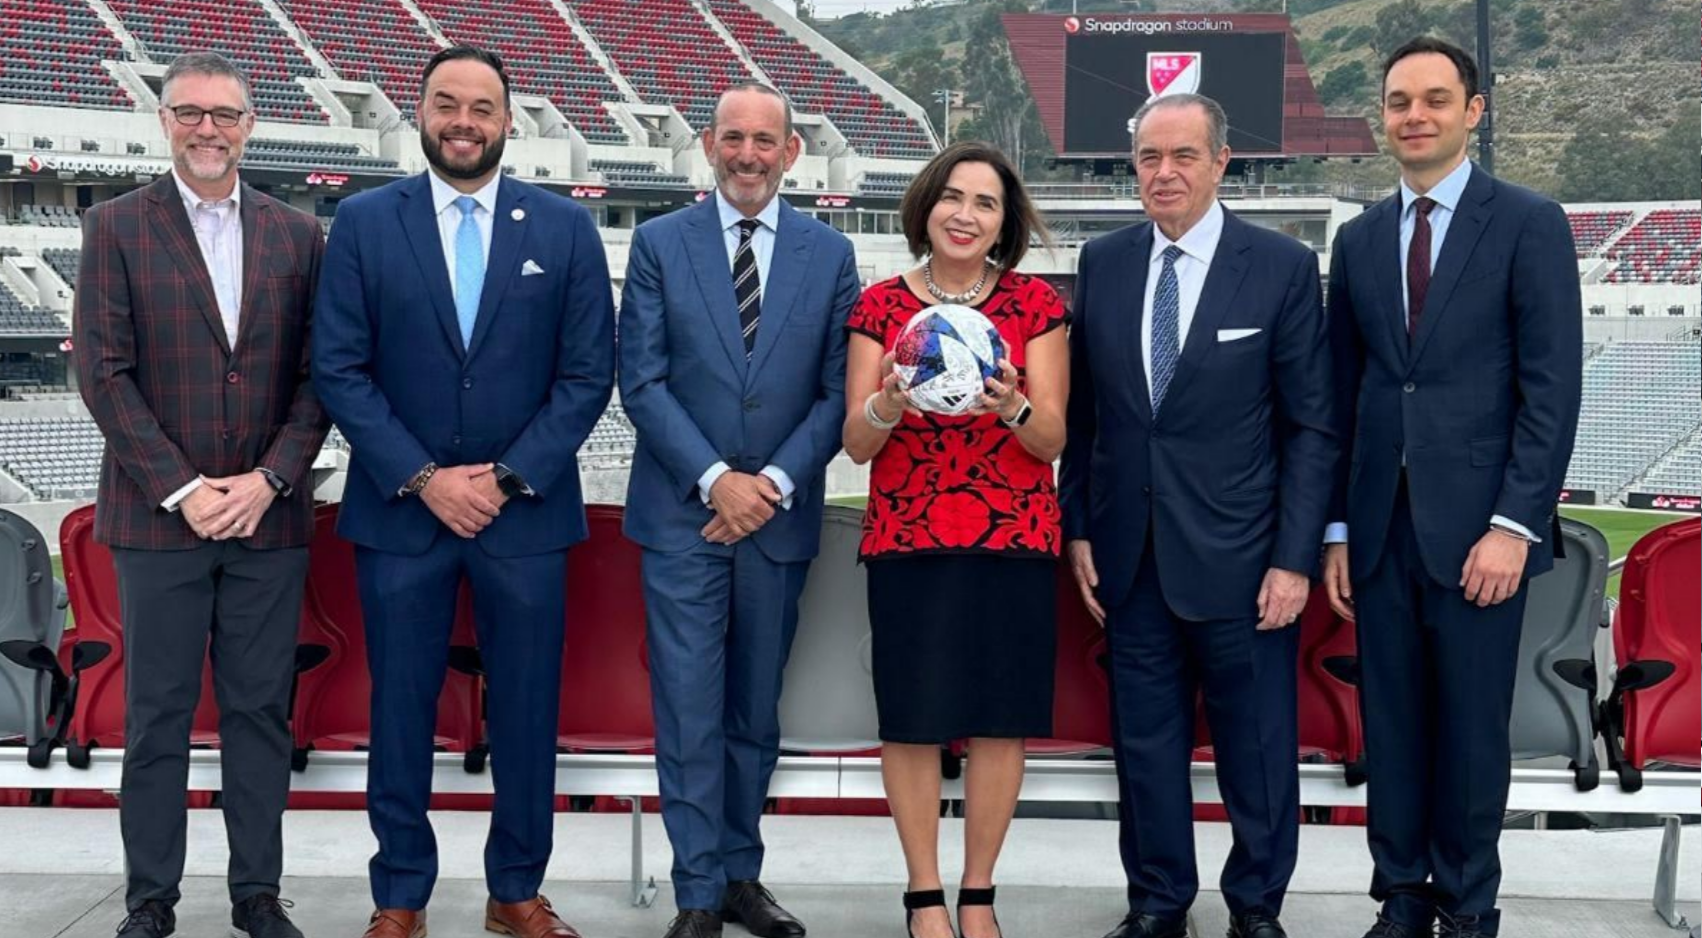 SDSU President Adela de la Torre (center) and JD Wicker (far left) joined in the historic announcement Thursday, May 18, 2023 at Snapdragon Stadium. (SDSU Photo)